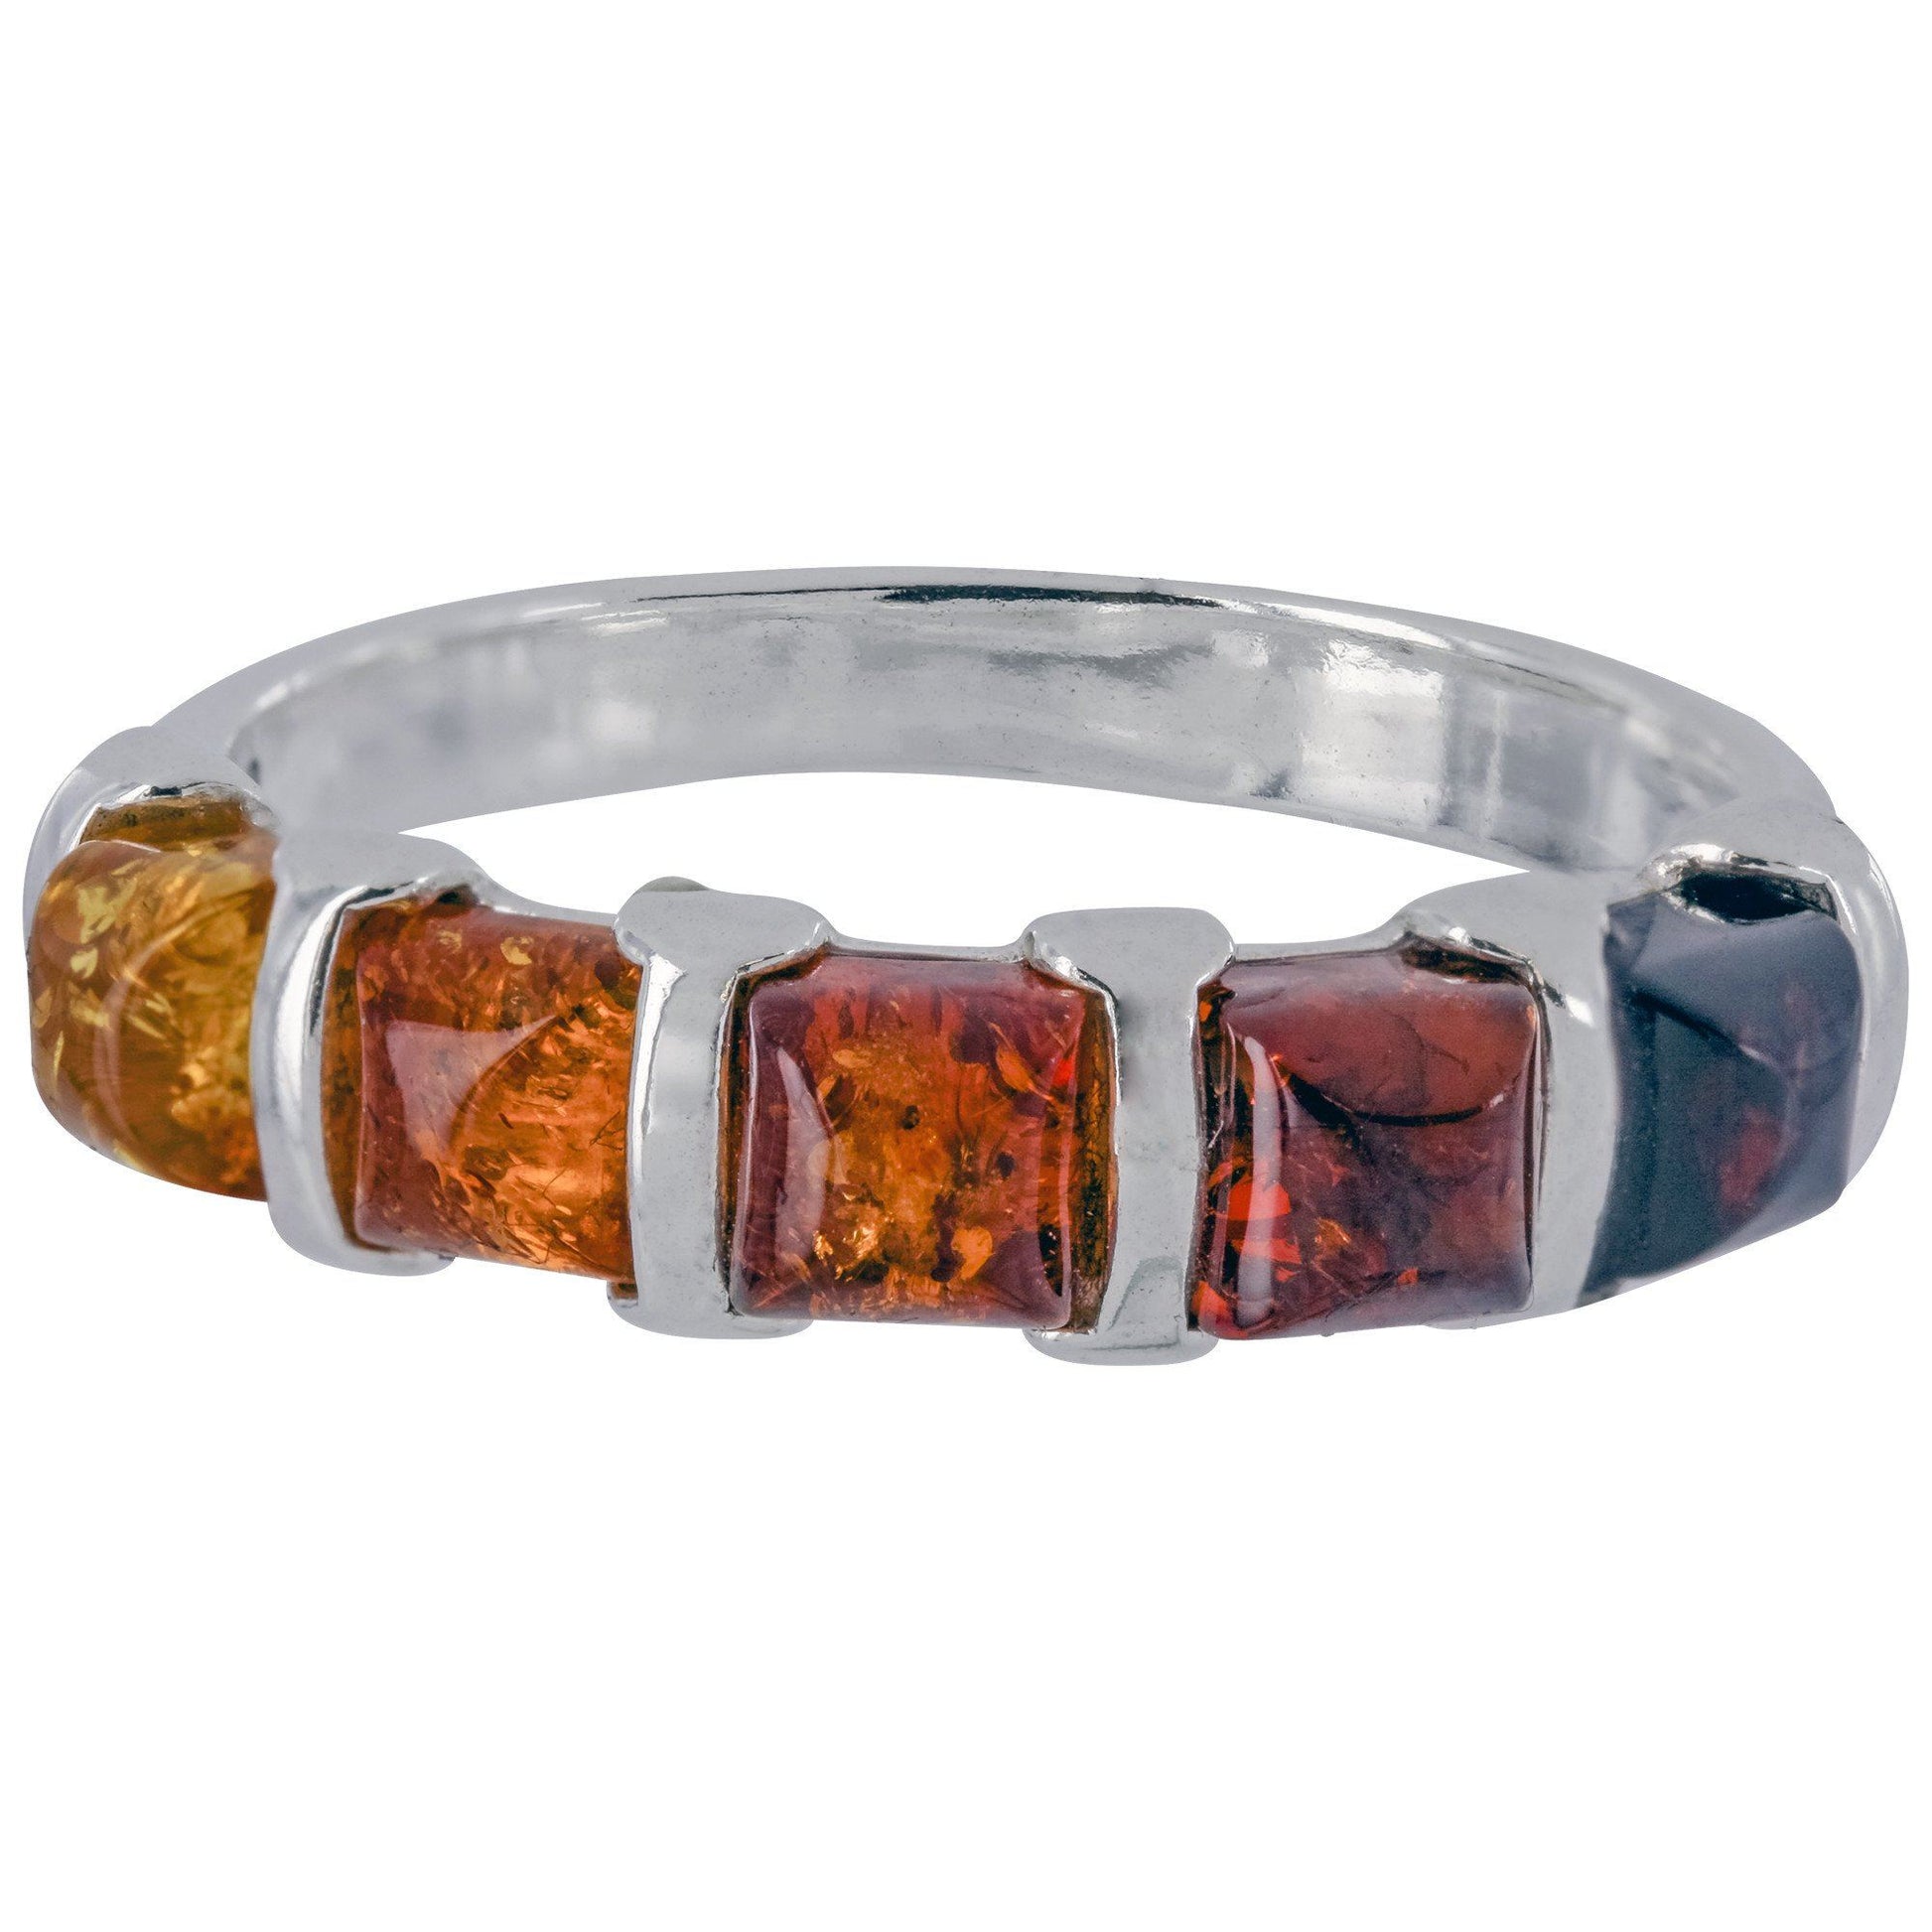 Amber Ombre & Sterling Ring